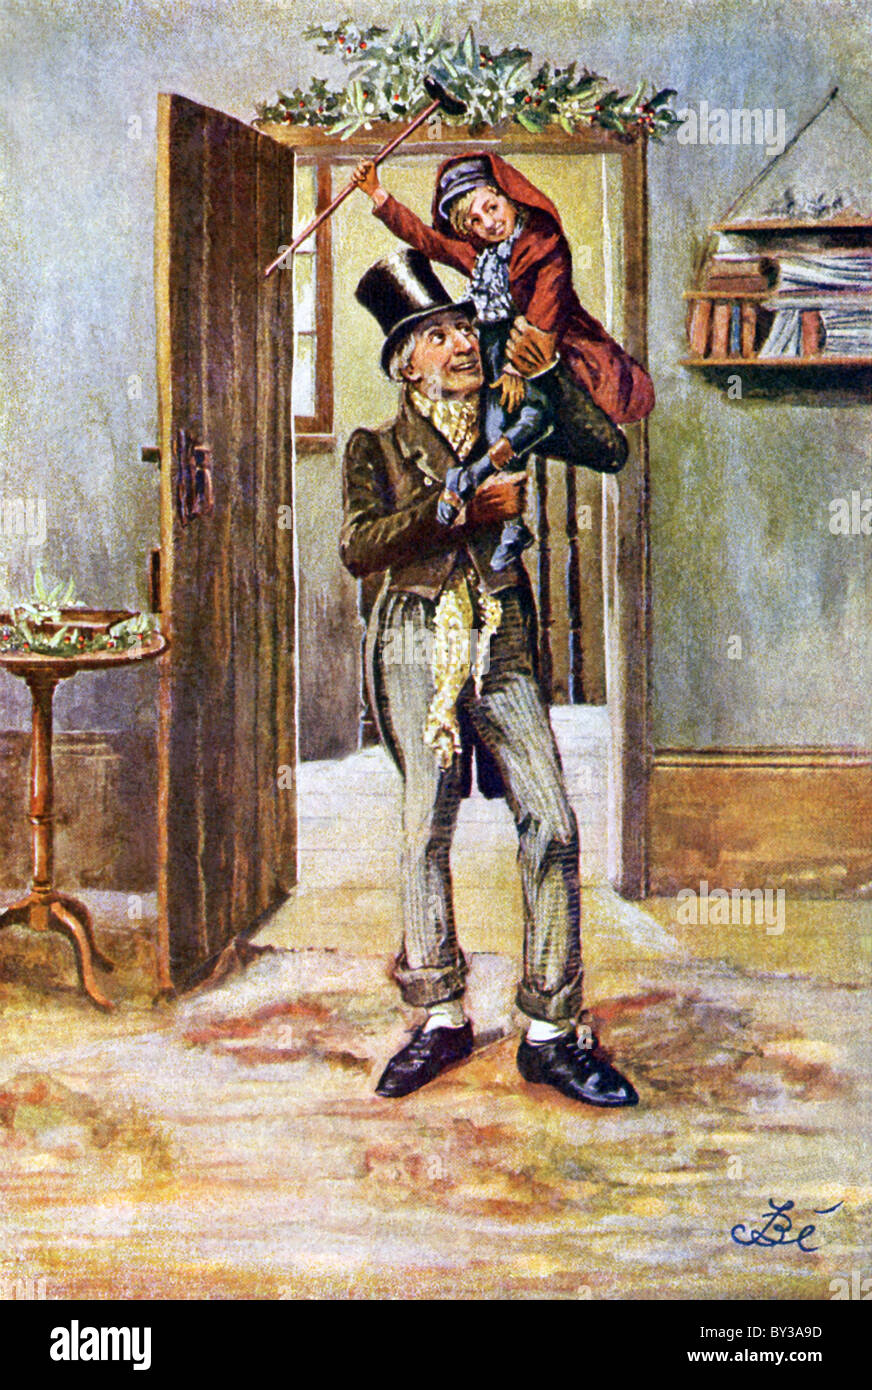 Bob Cratchit carries his son  Tiny Tim on his shoulders as he enters their house—from Dickens' Christmas Carol. Stock Photo